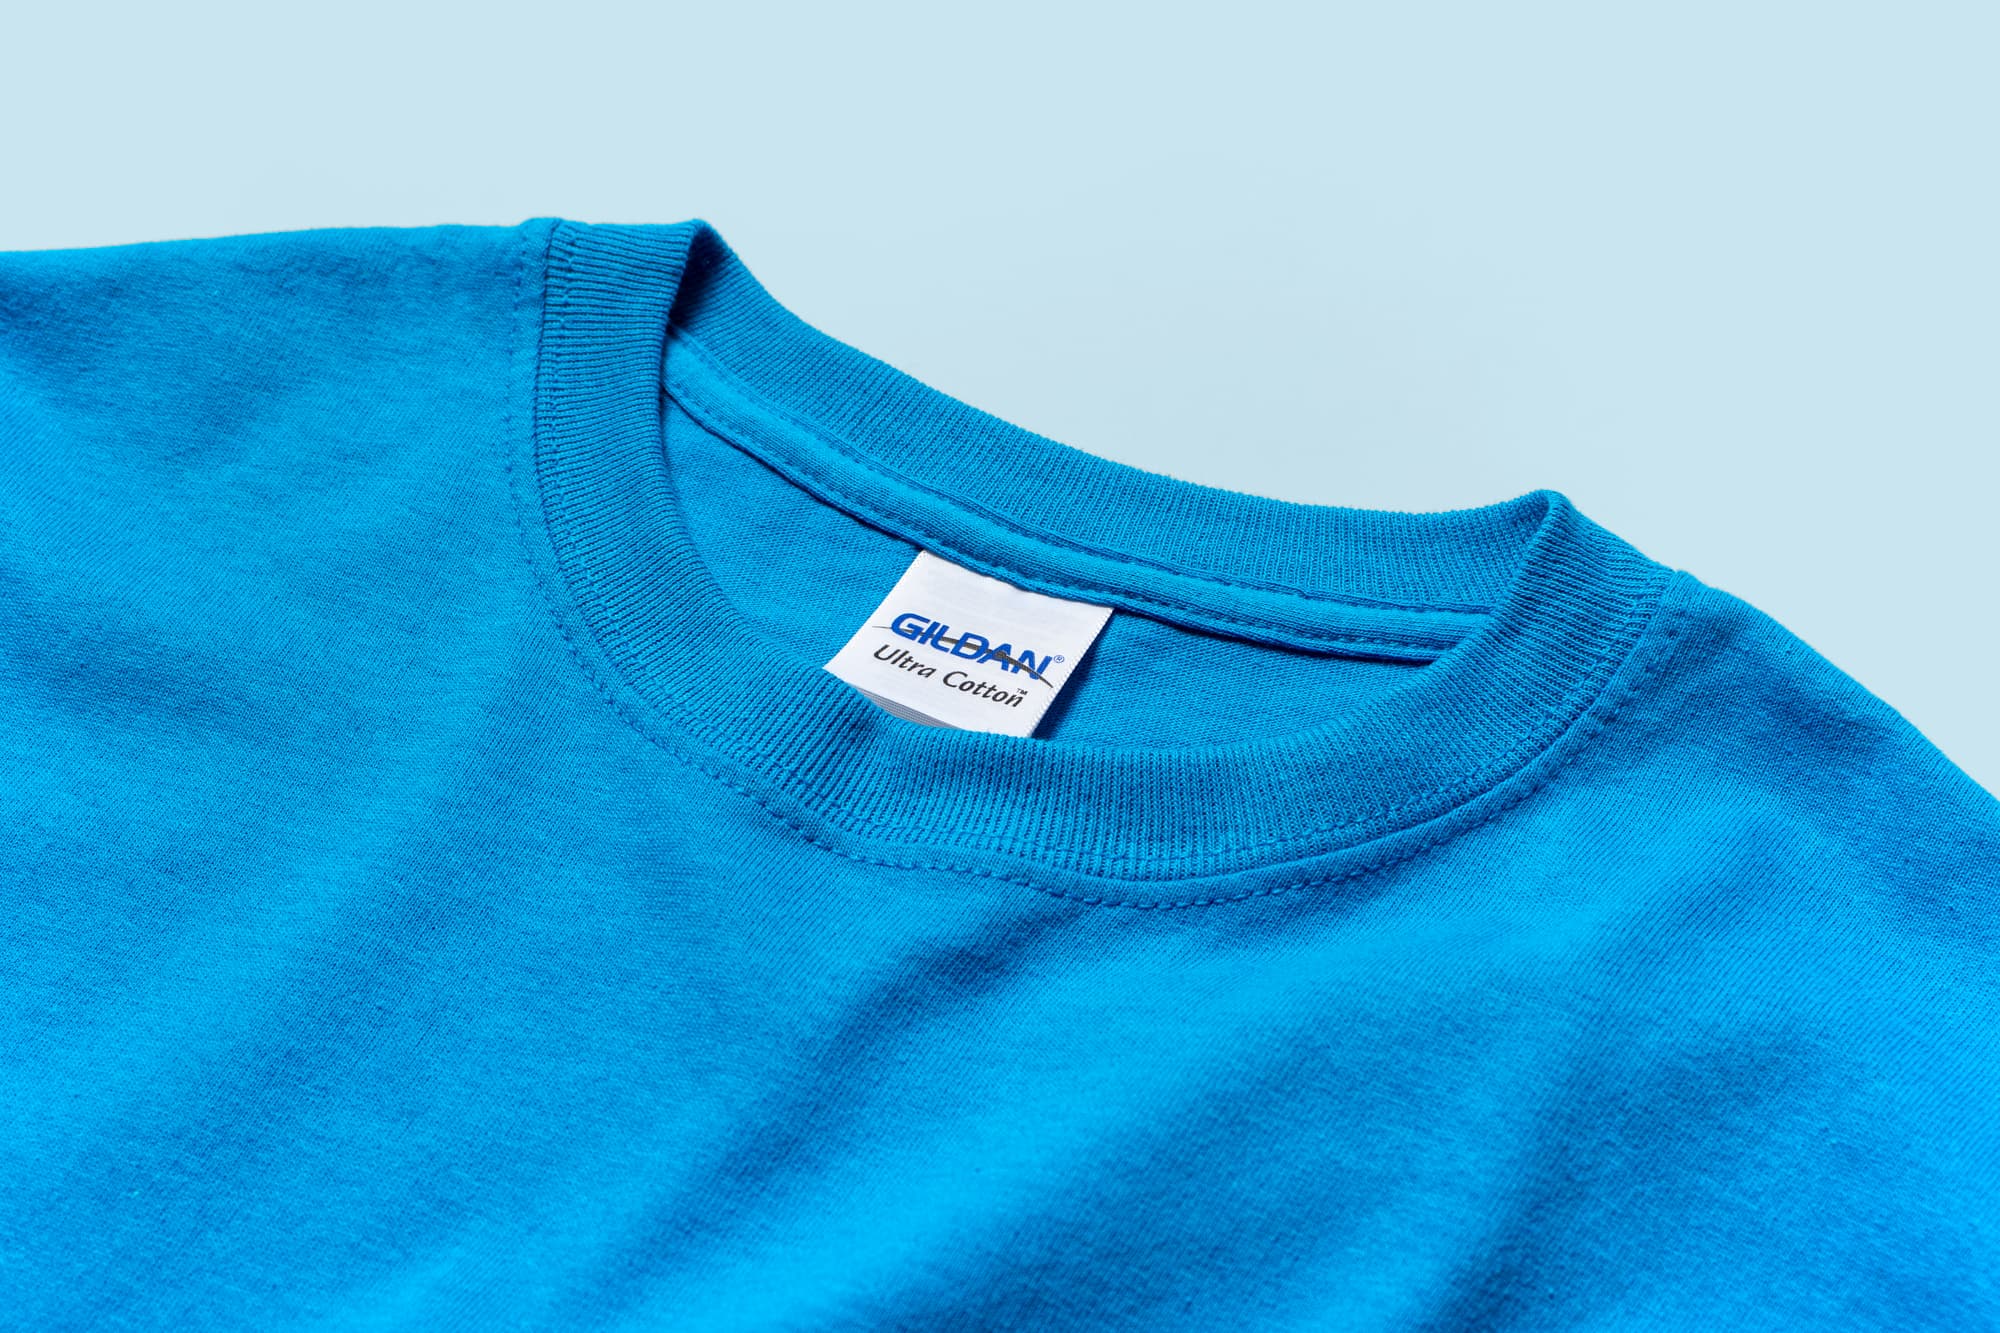 Detail image of the collar and tag of the Gildan Ultra Cotton Tee.